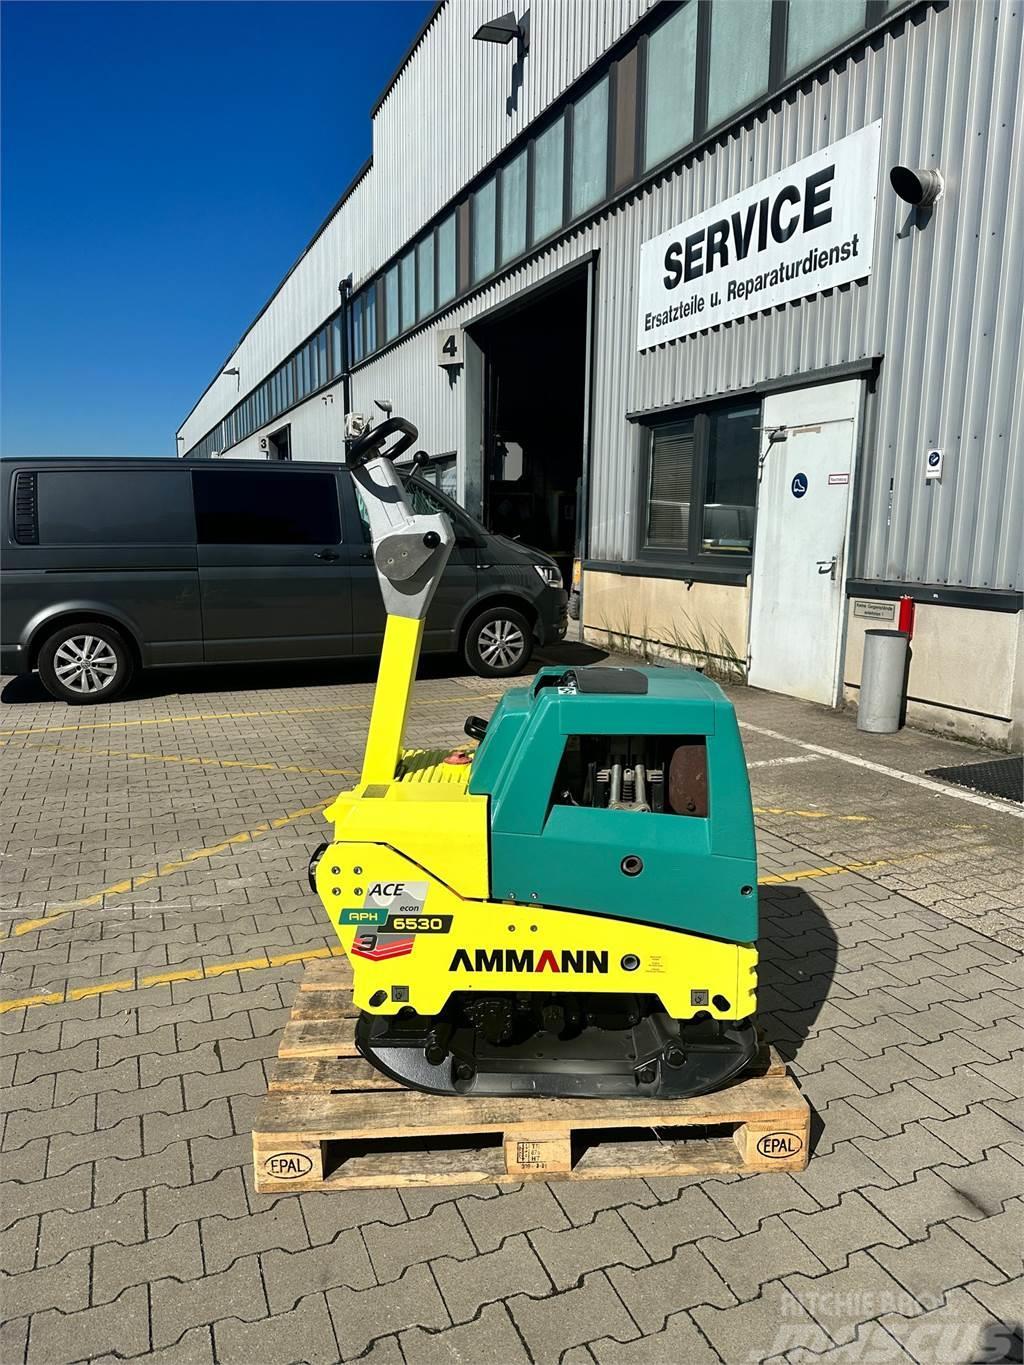  APH 6530 with ACE APH 6530 with ACE Vibrator compactors